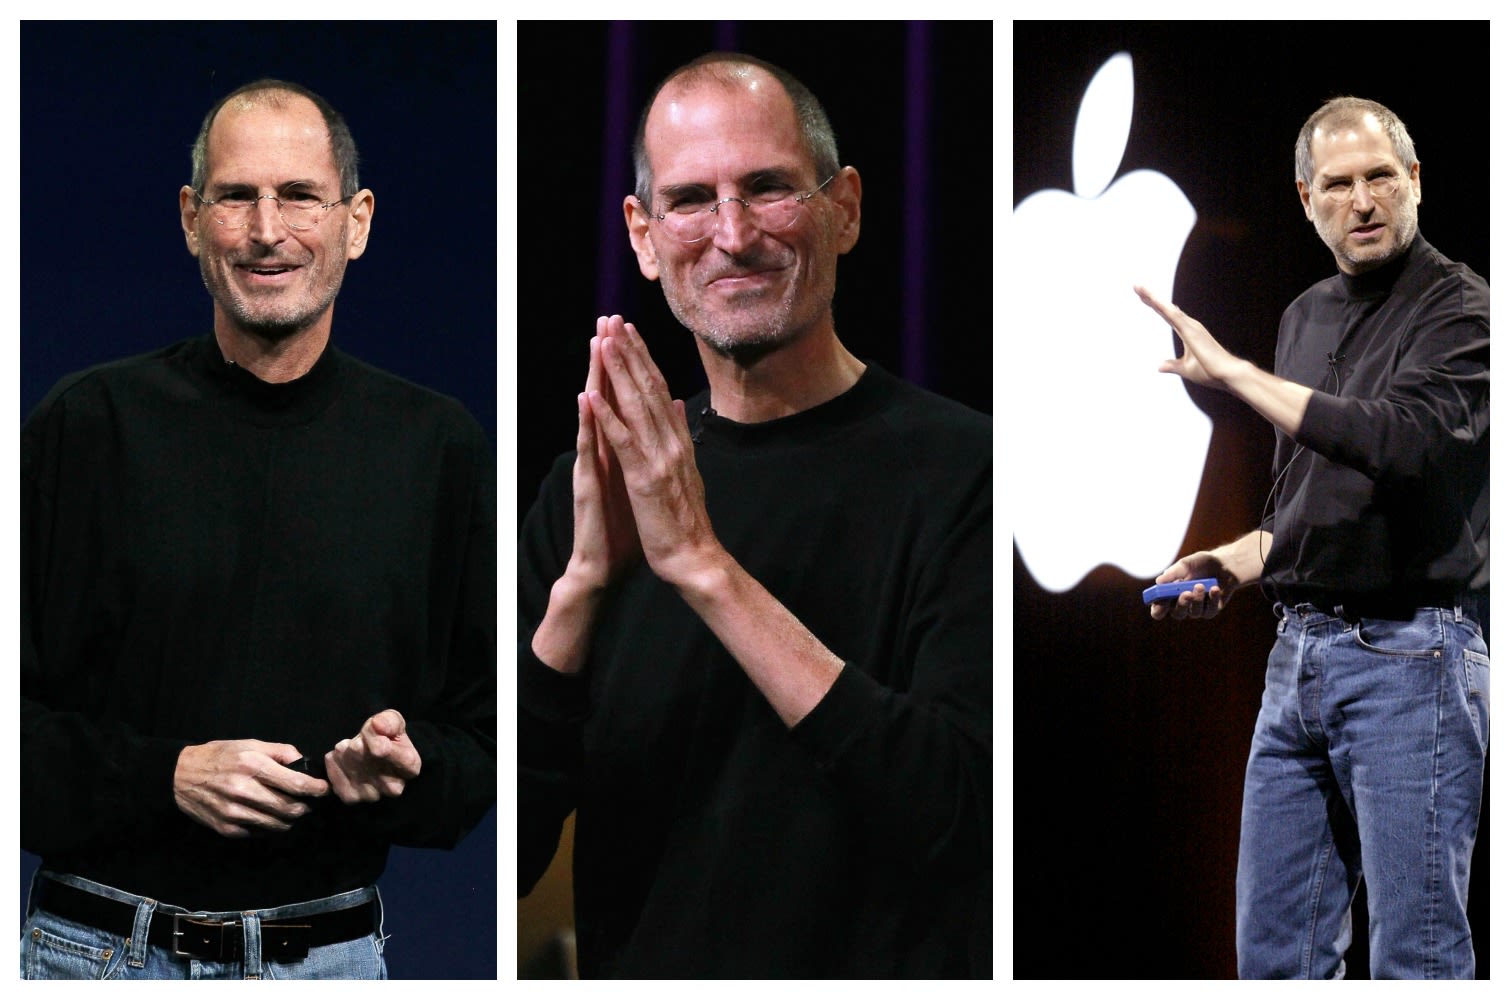 Why Steve Jobs always wore the same thing